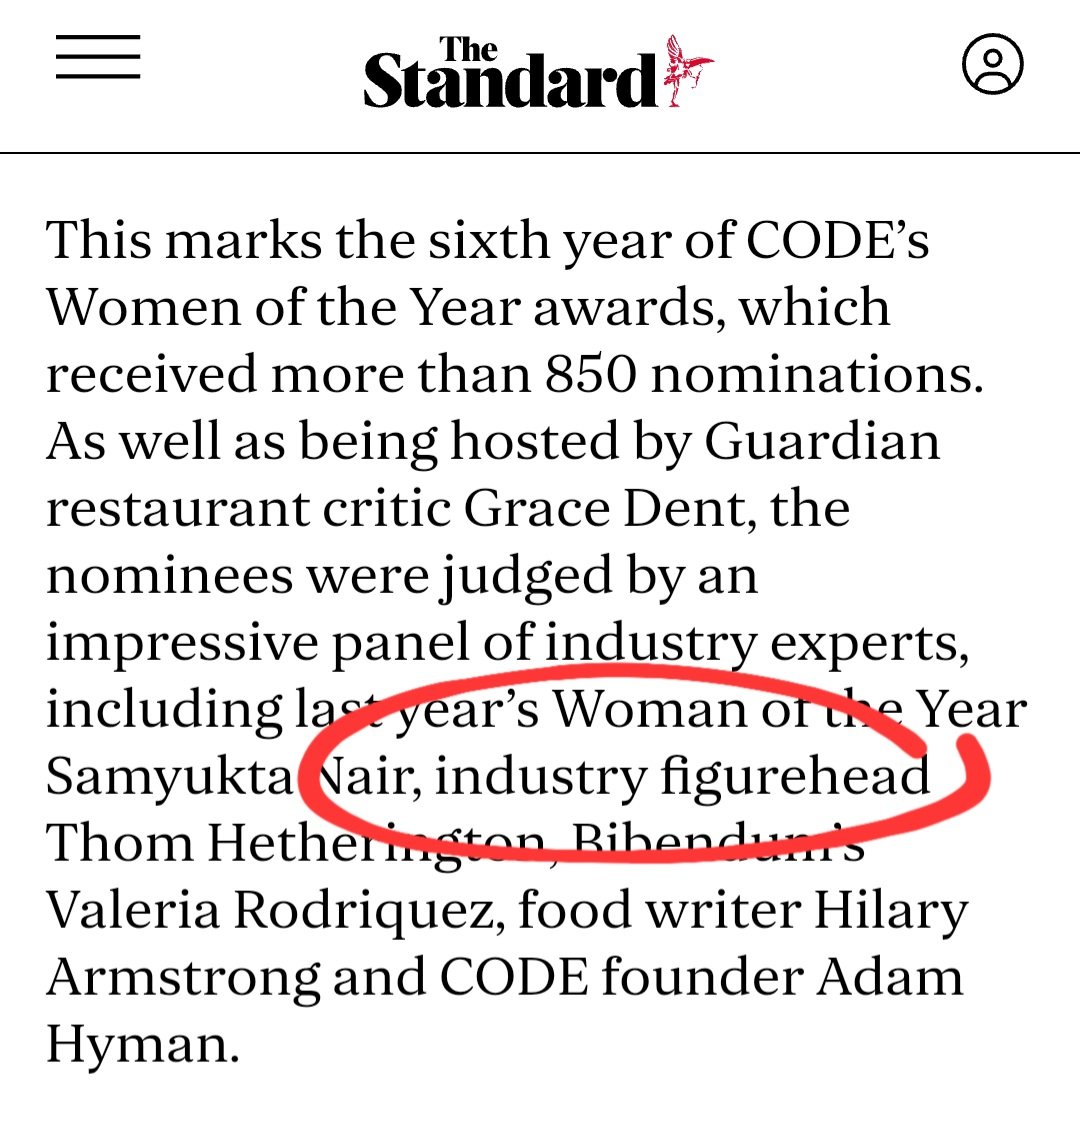 'Industry figurehead' - I'll take that! Thanks @EveningStandard, thanks for inviting me @CODEHospitality, and well done to all the amazing women on this year's list.